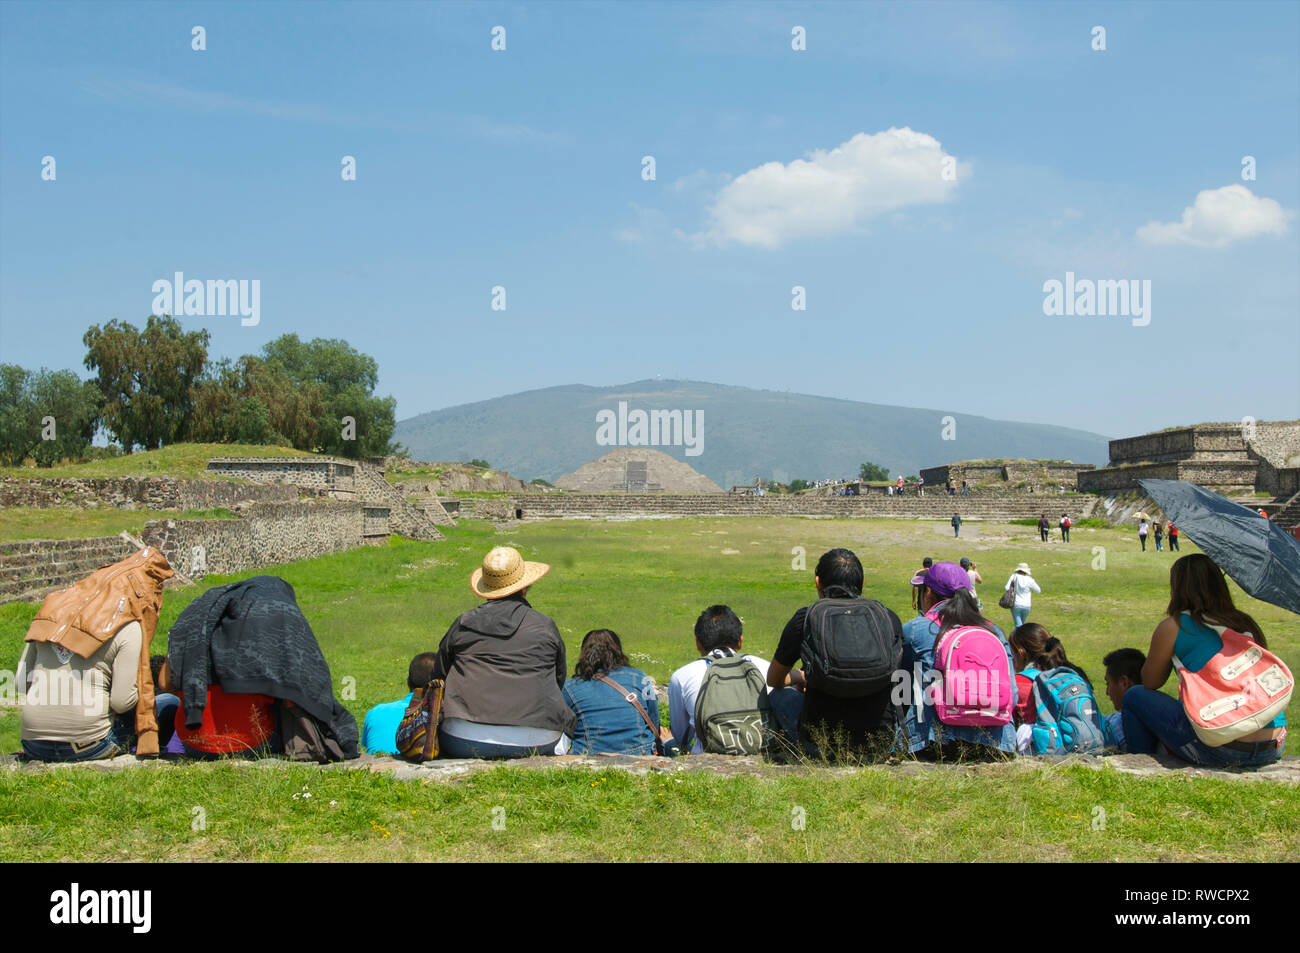 View of the Pyramid of the Sun and people walking and resting on the Avenue of the Dead with tourists at Teotihuacan, Mexico Stock Photo